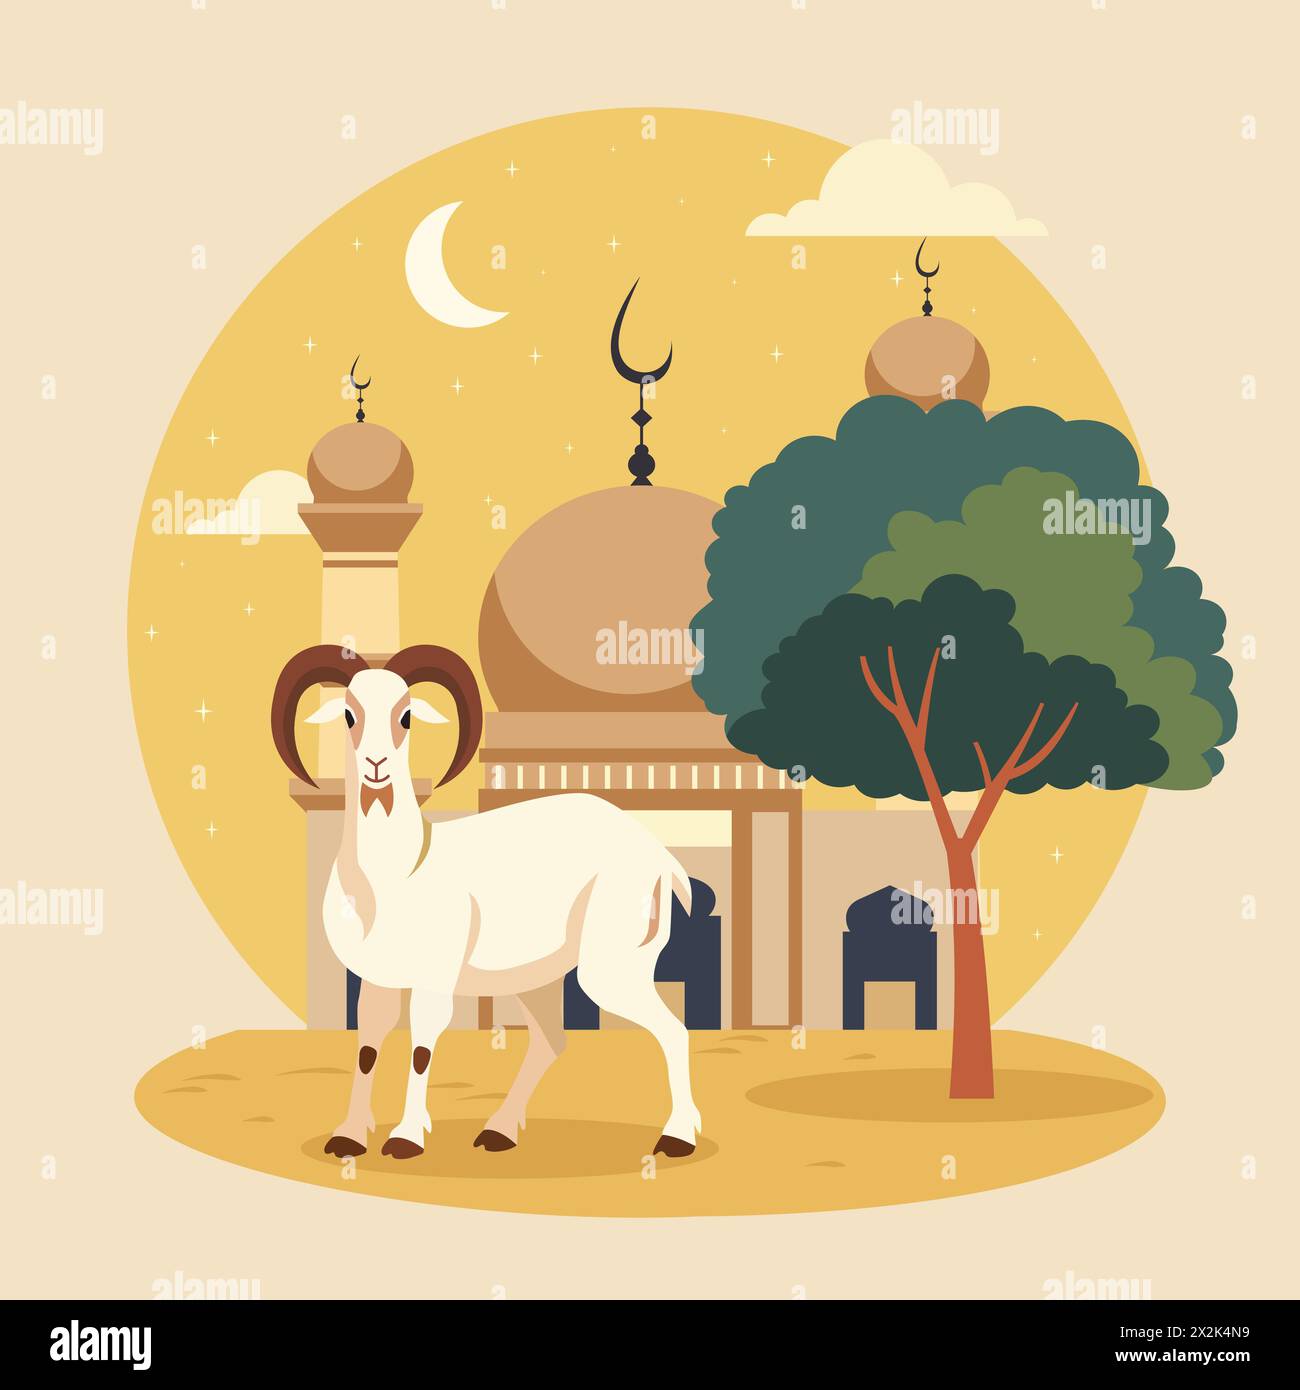 Sheep Goat Animal For Islamic Eid Al Adha Celebration in Mosque Background Stock Vector